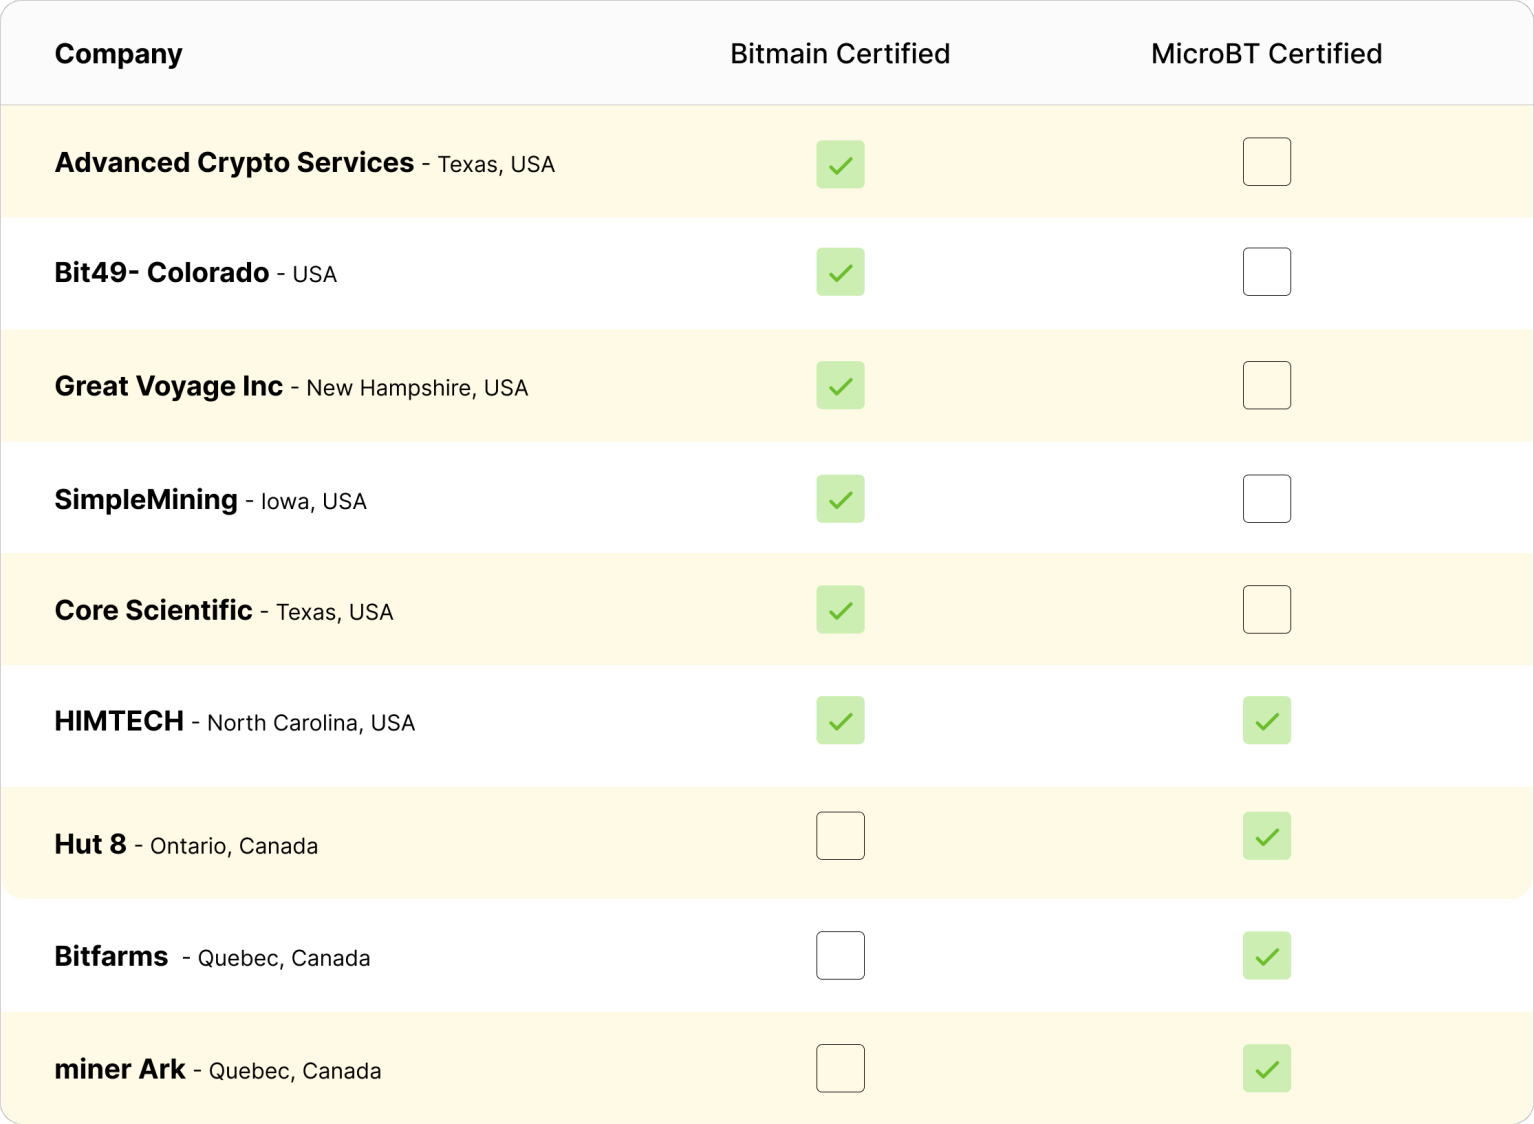 Bitmain and MicroBT certified repair centers in the United States and Canada